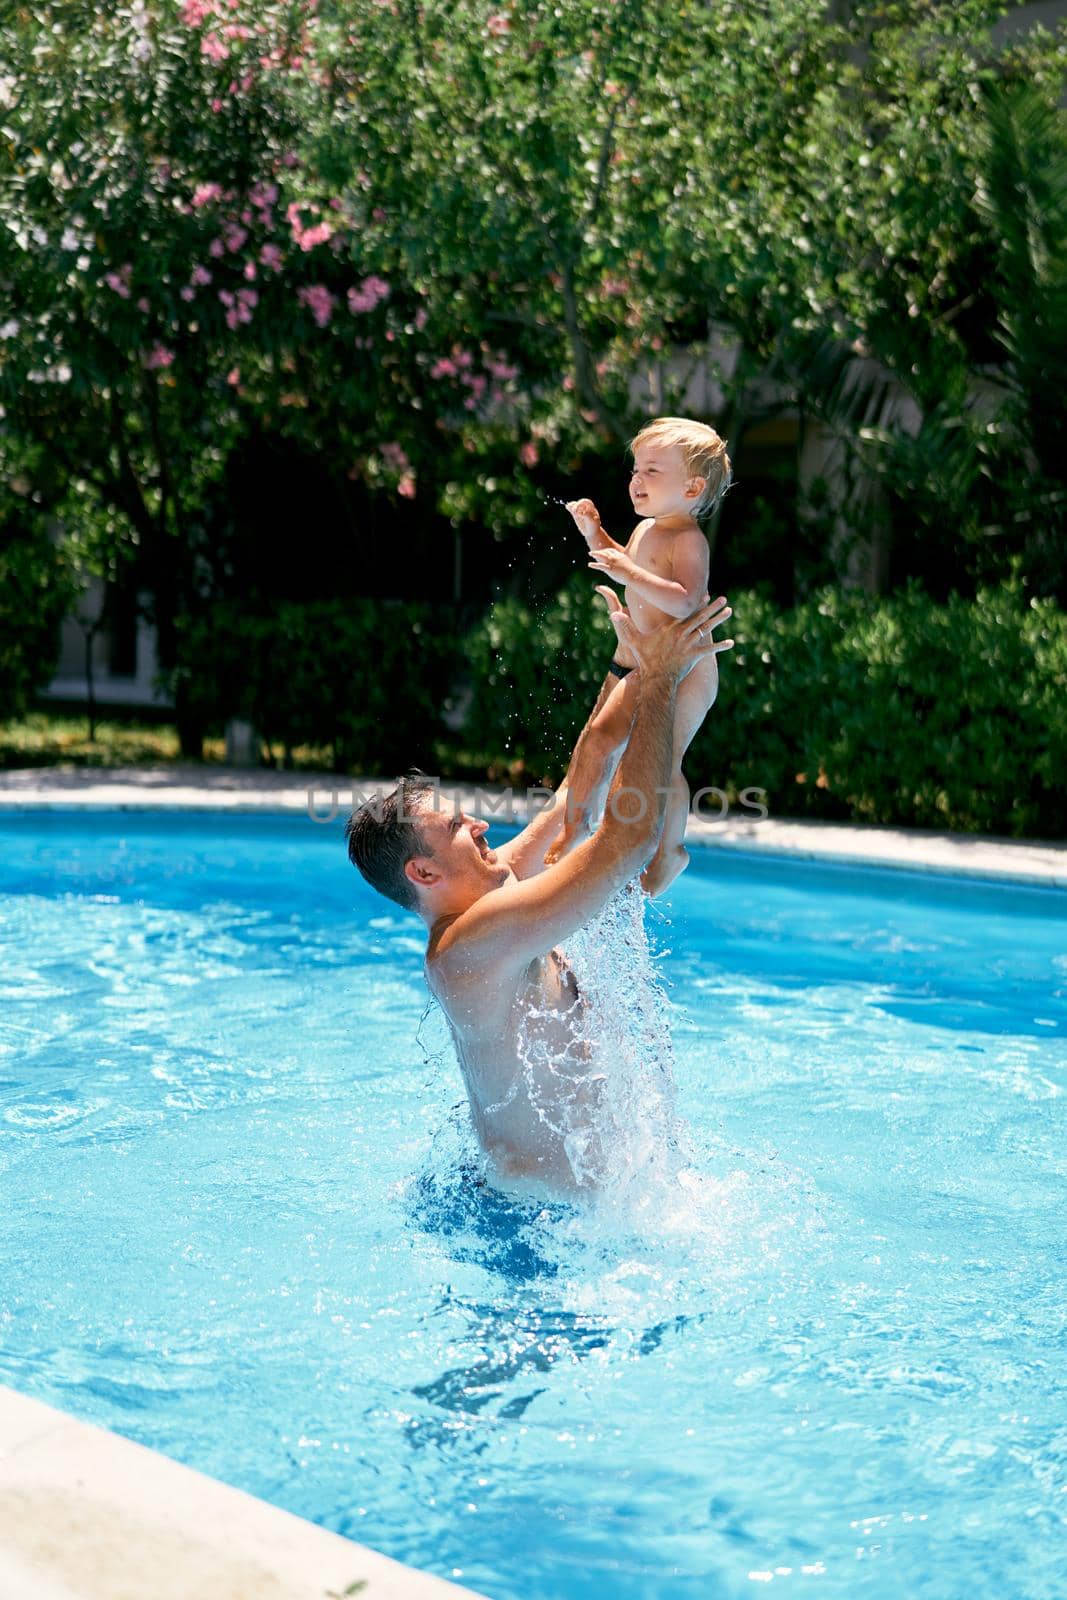 Dad throws a small child in the air over the turquoise water by Nadtochiy